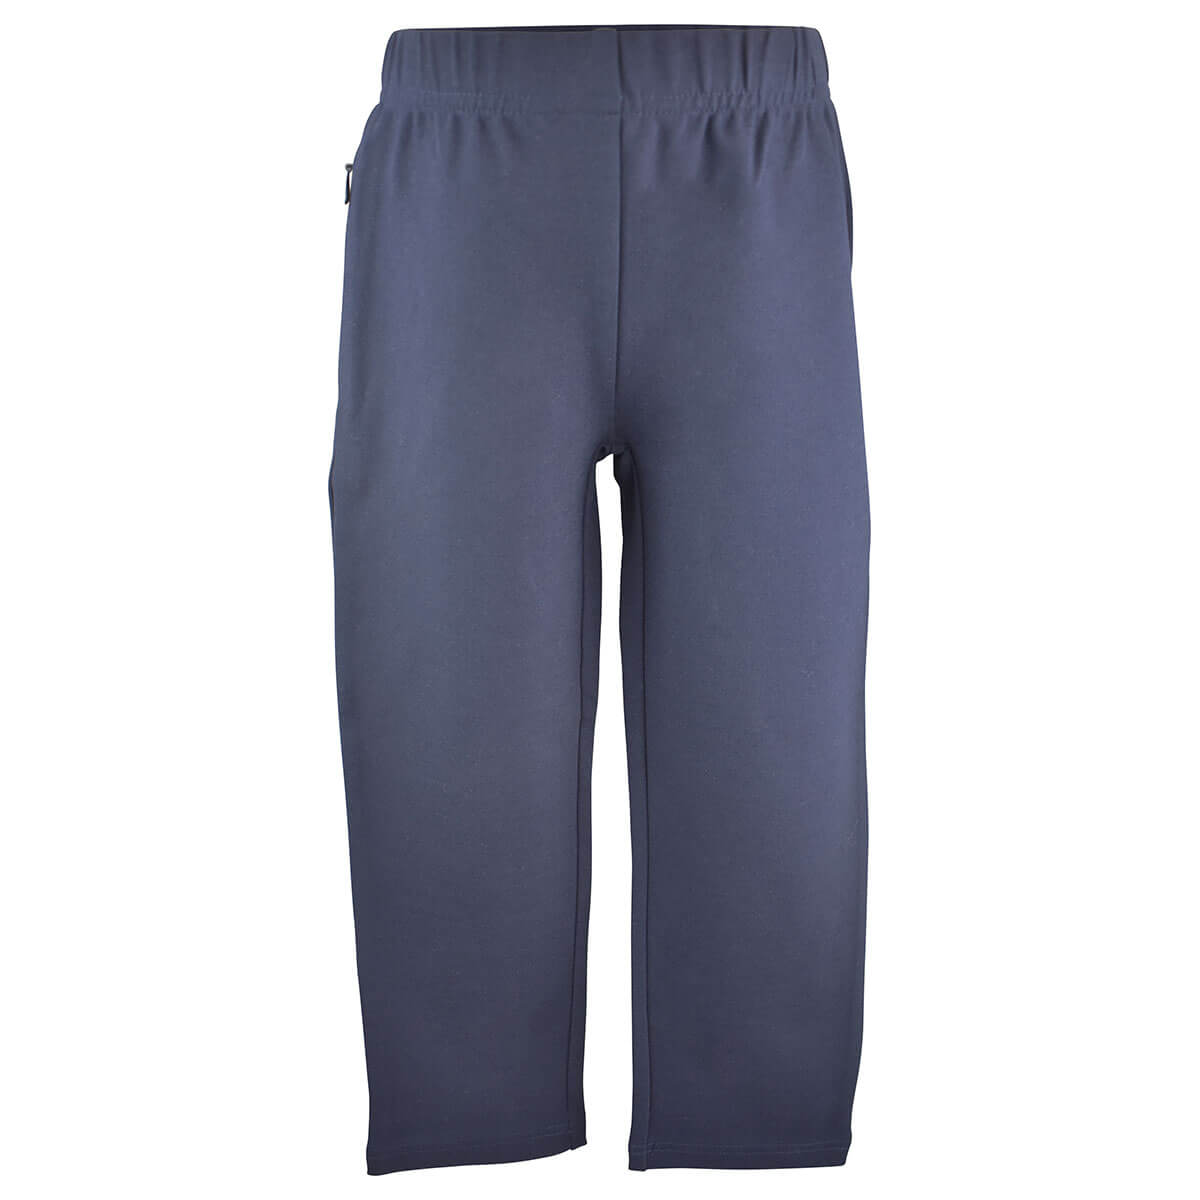 Track Pant Straight Leg | Bourchier St. Primary School | Noone